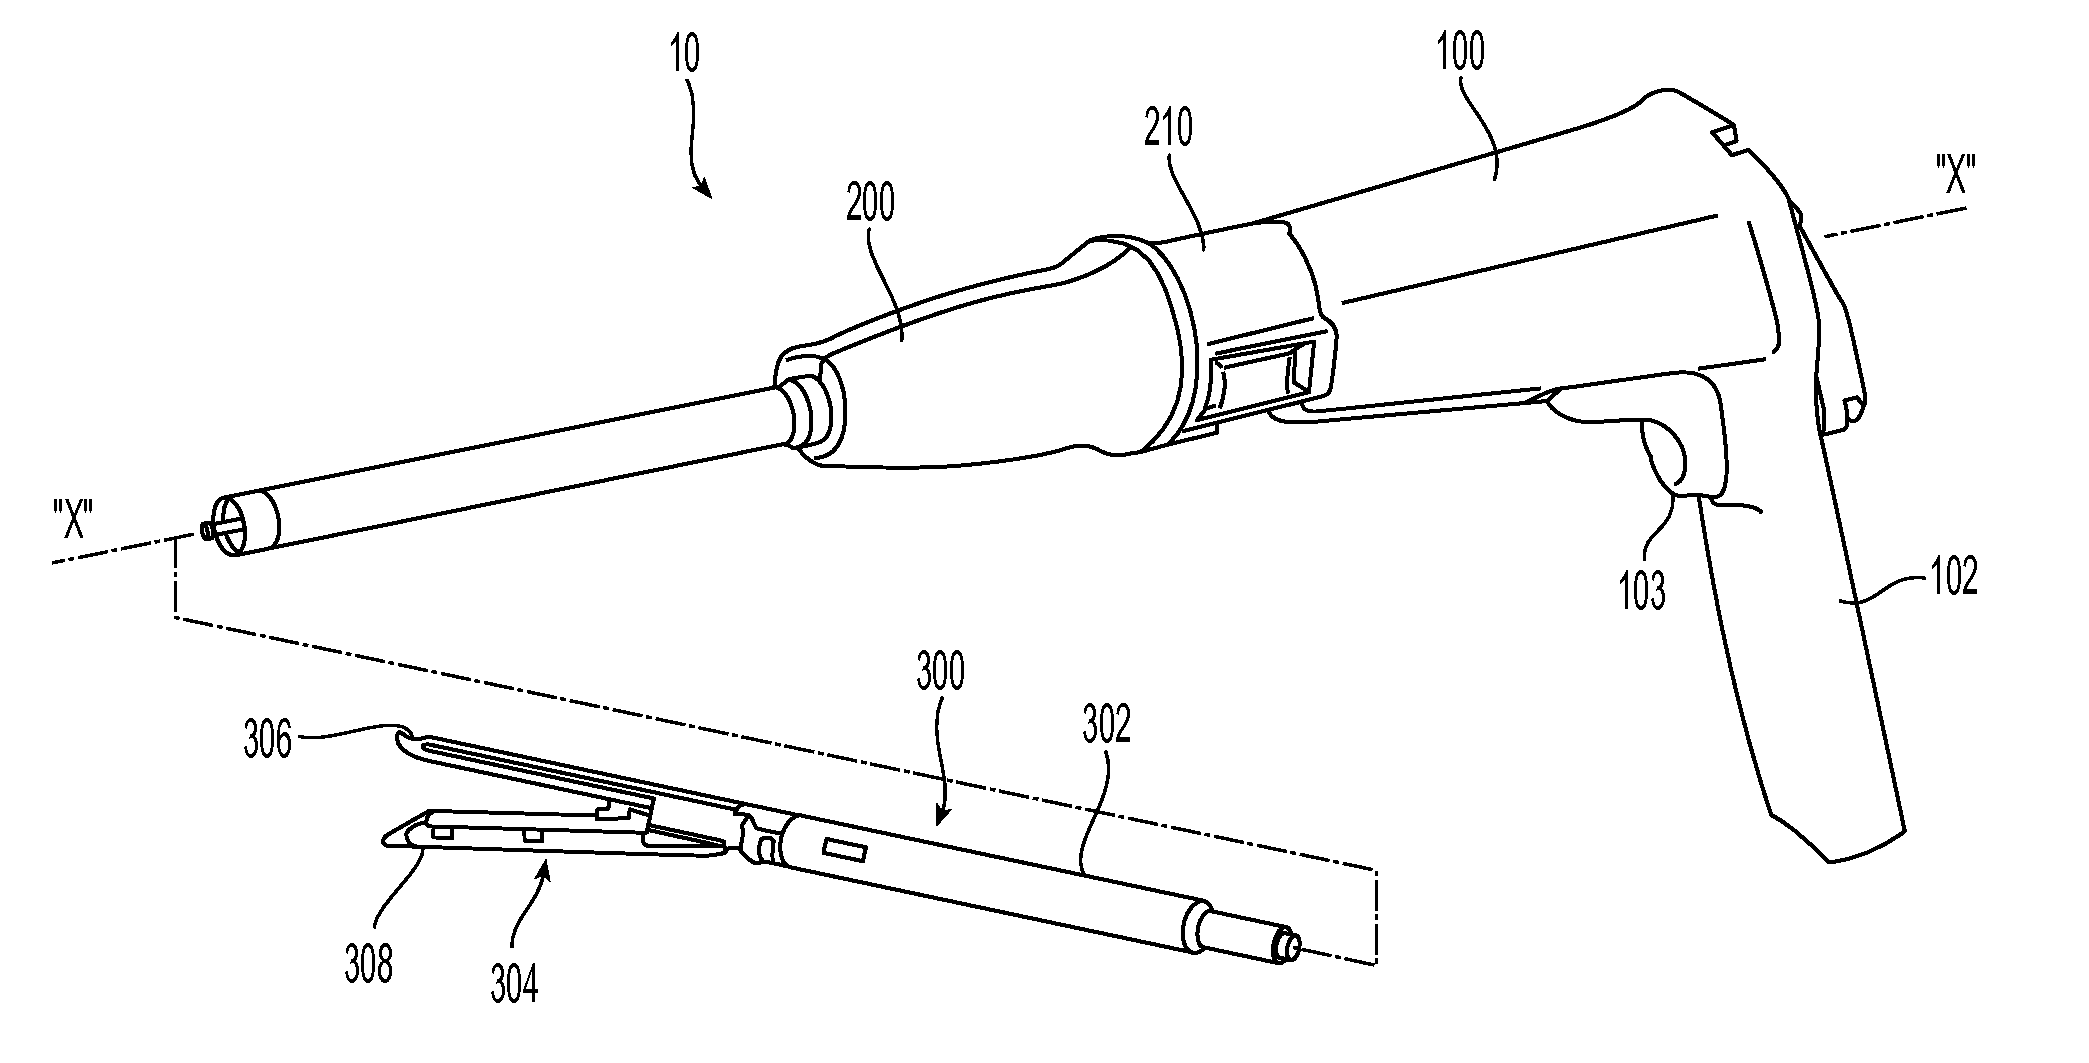 Adapter direct drive with manual retraction, lockout and connection mechanisms